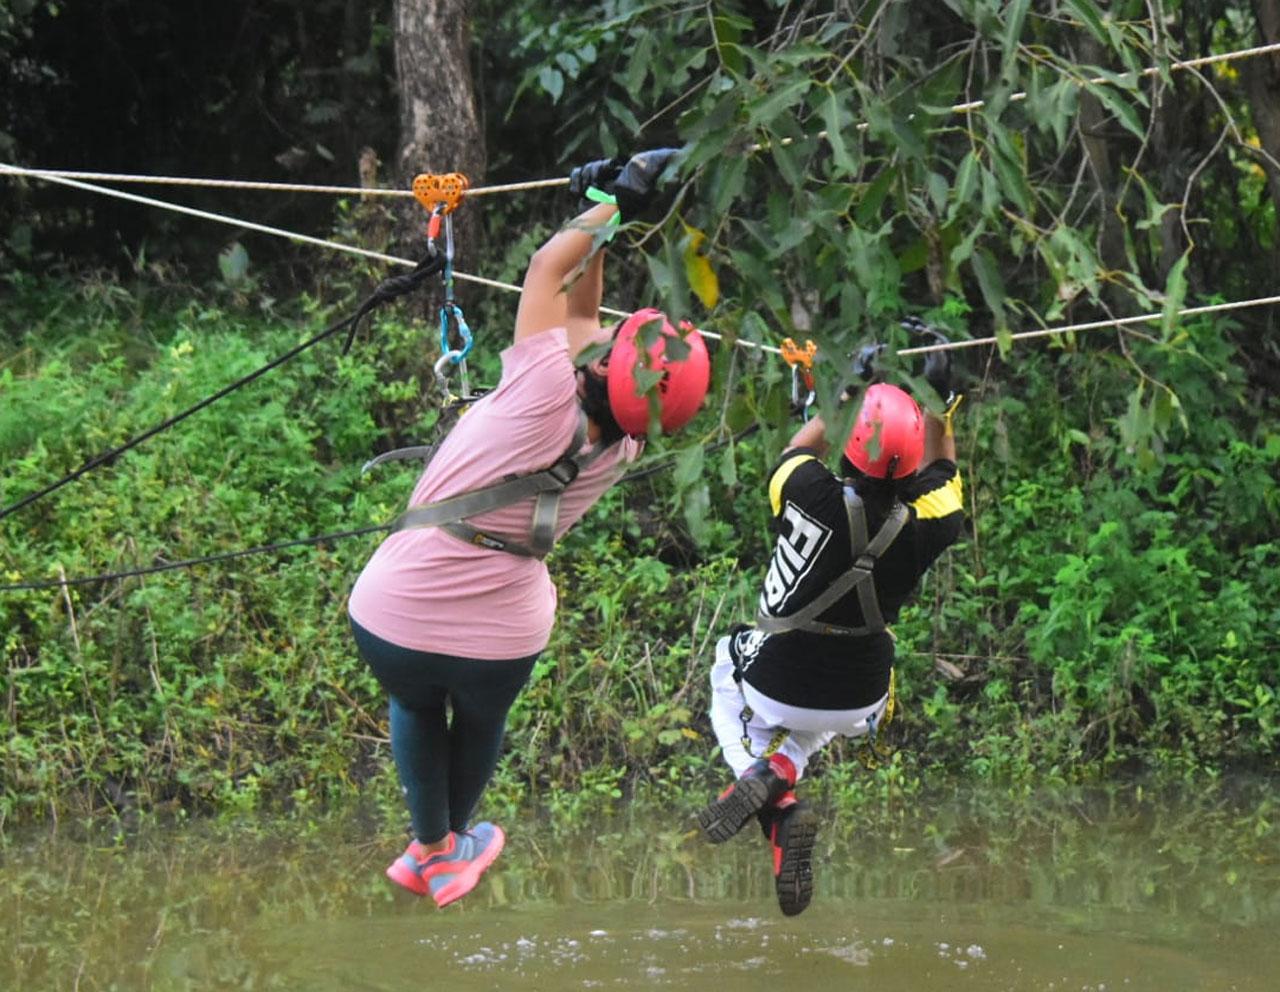 Both Devoleena and Arti divided themselves among two teams and became the captain of each. There were certain tasks that they needed to perform to survive in the jungle.